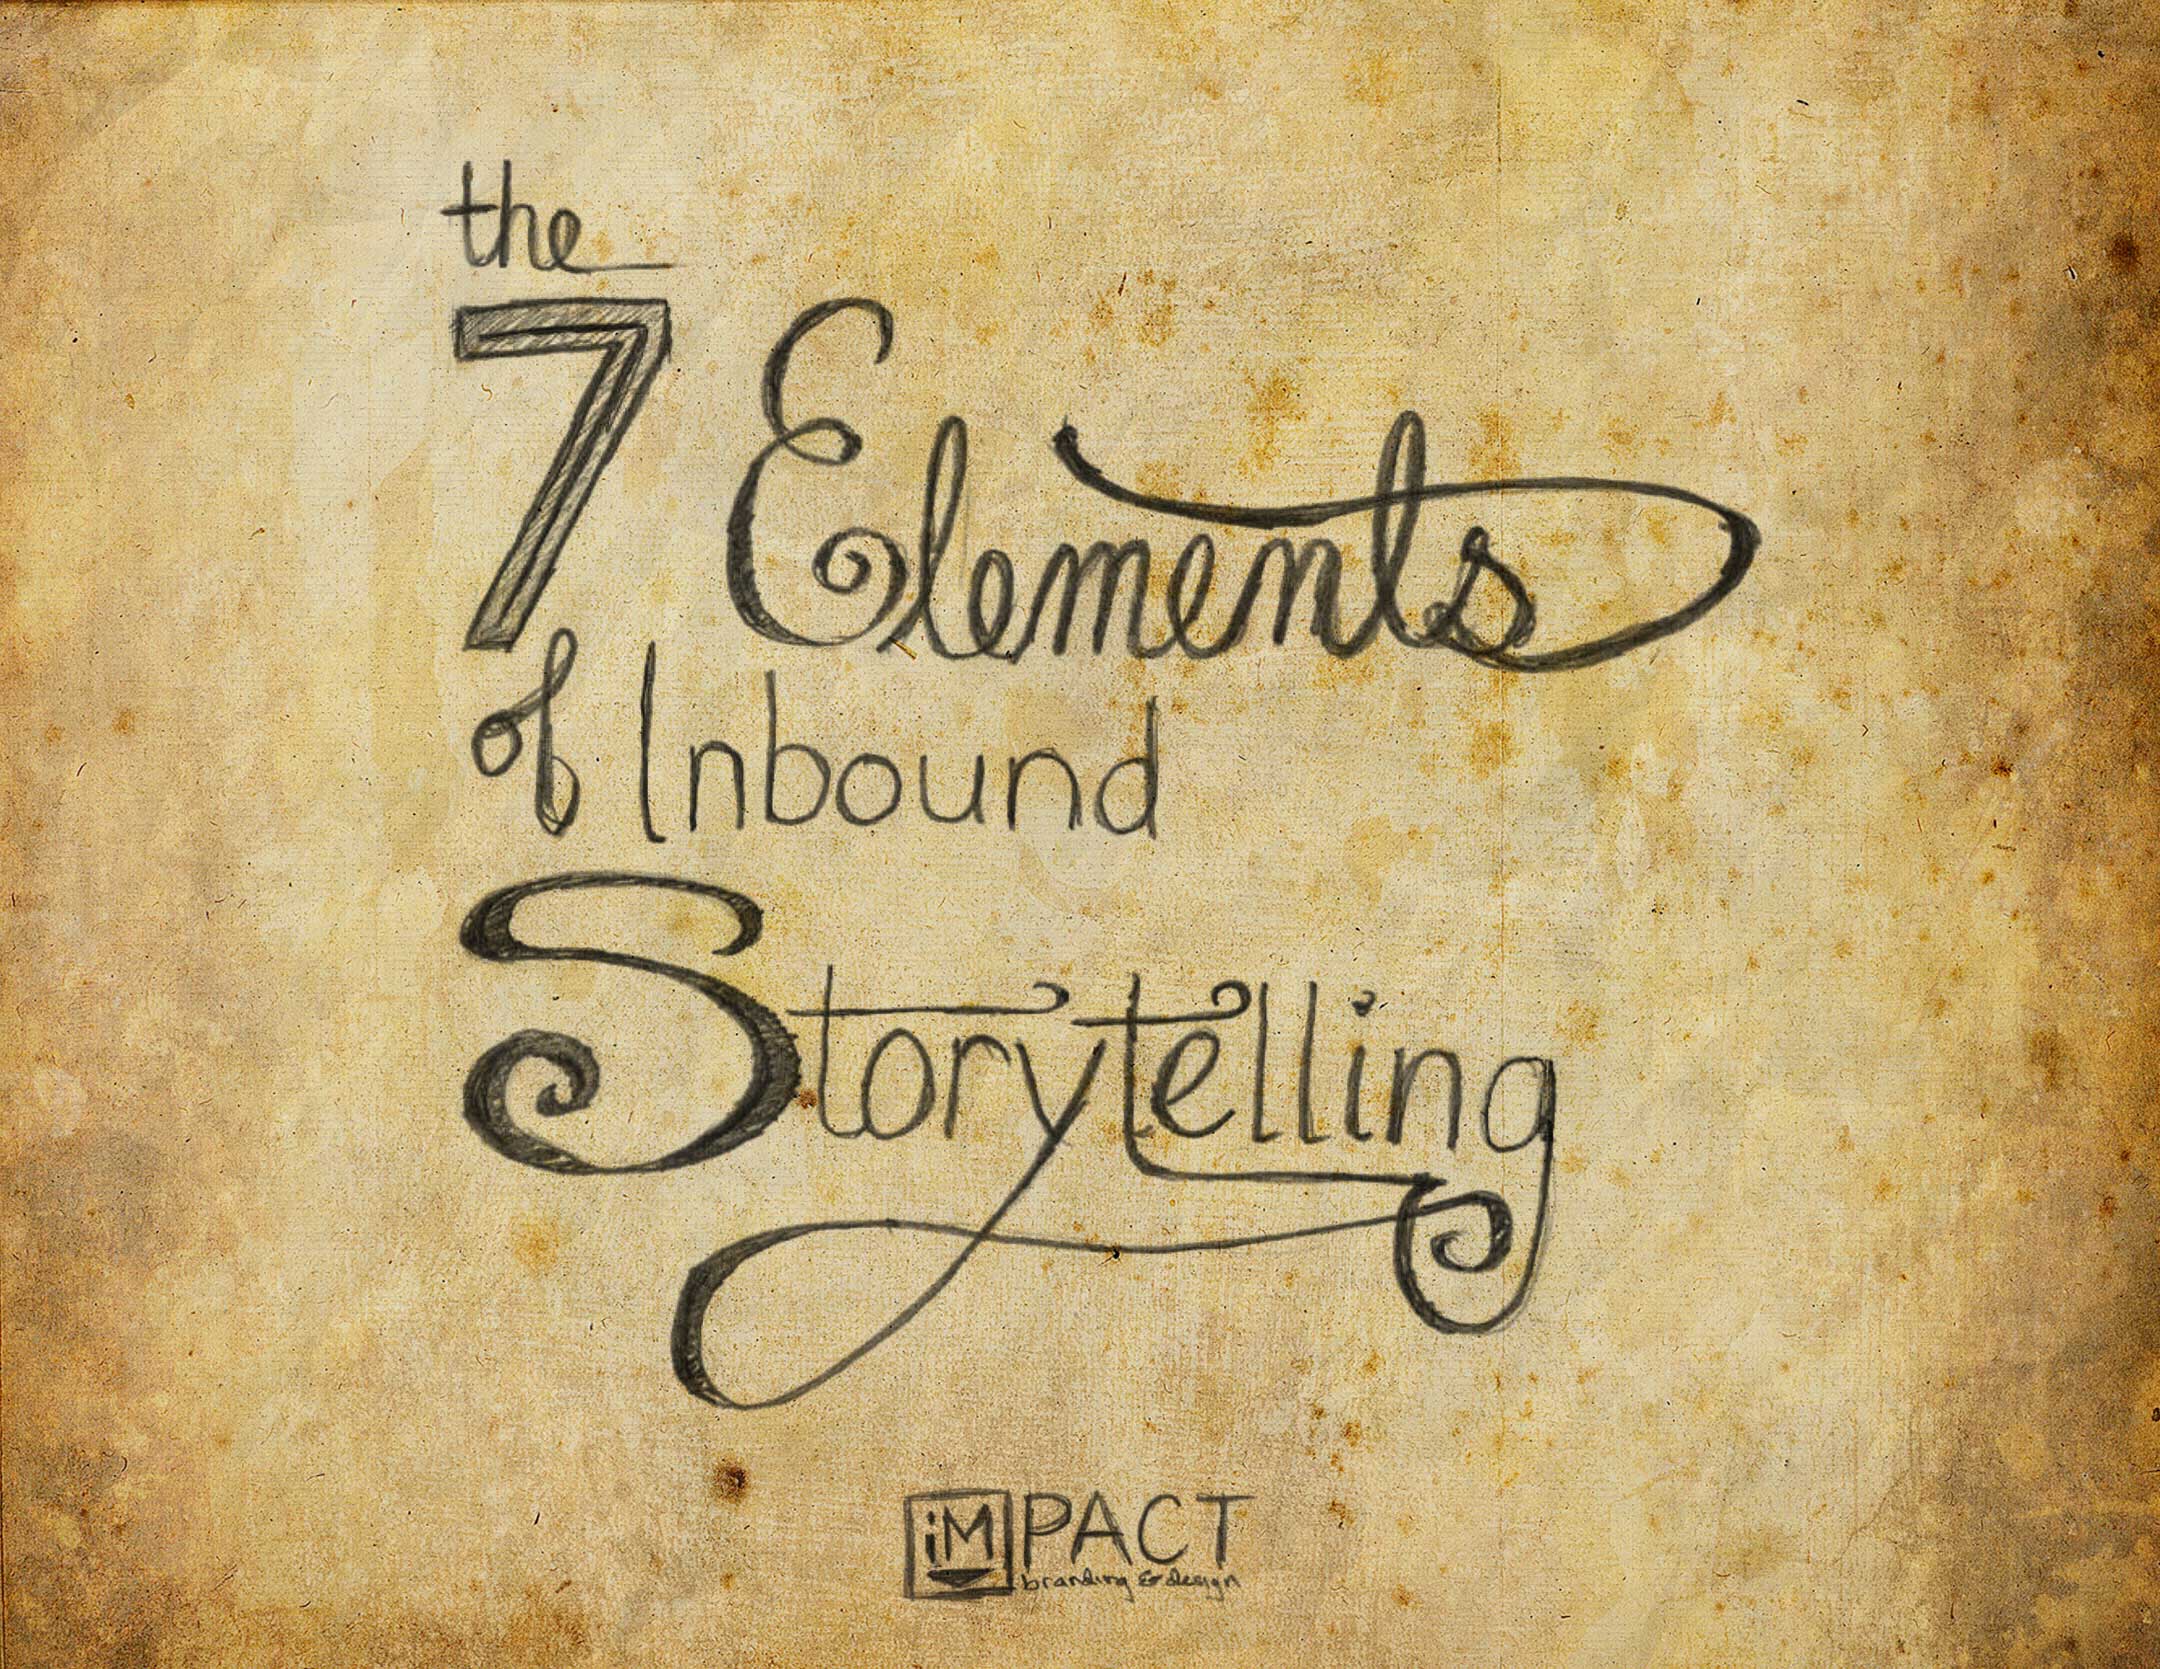 The 7 Elements of Inbound Story Telling